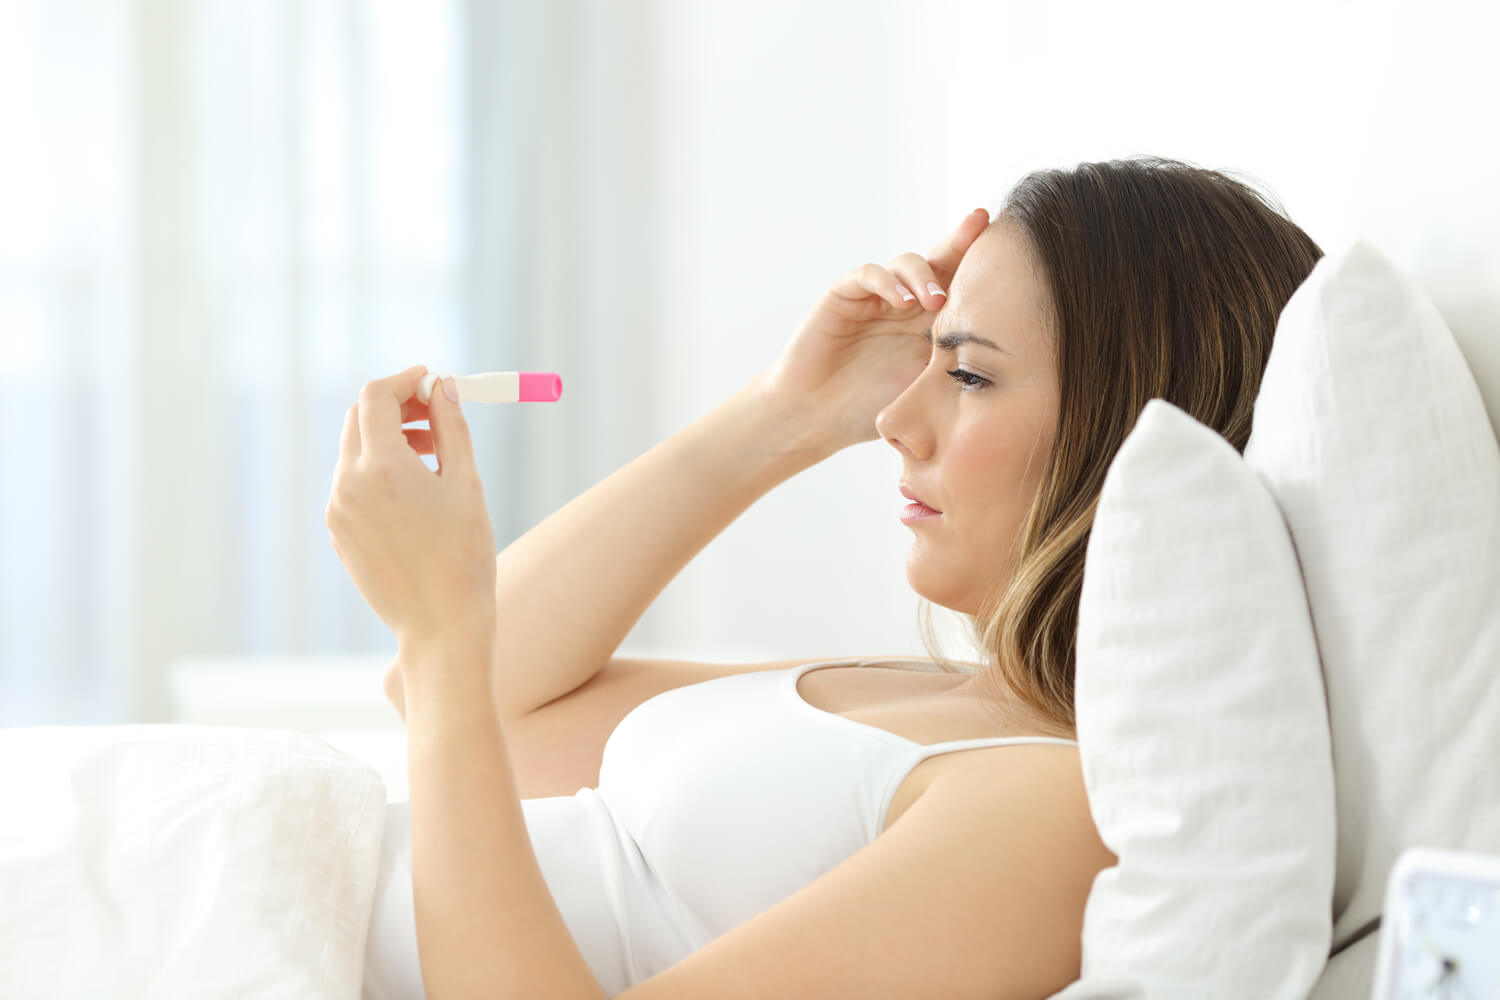 What Can Cause Pregnancy During Periods